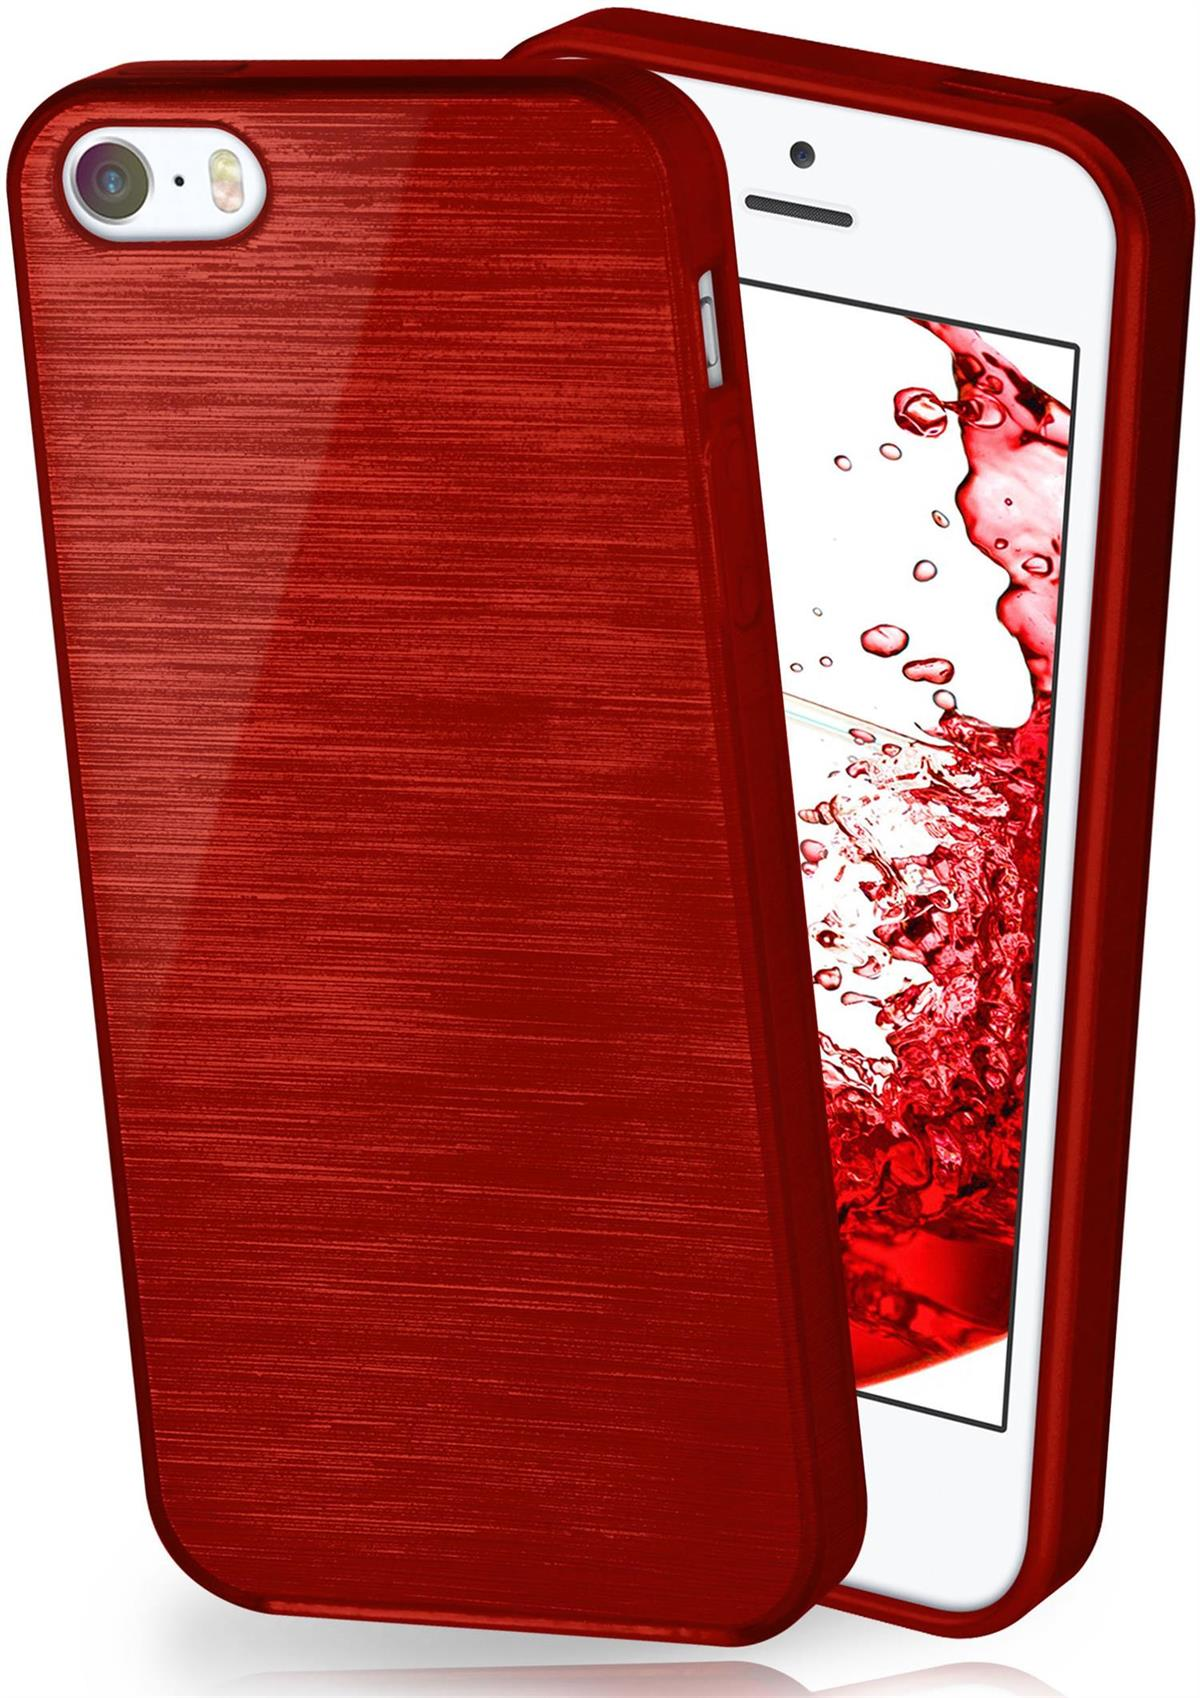 Case, Crimson-Red Backcover, 5s, iPhone Apple, Brushed MOEX